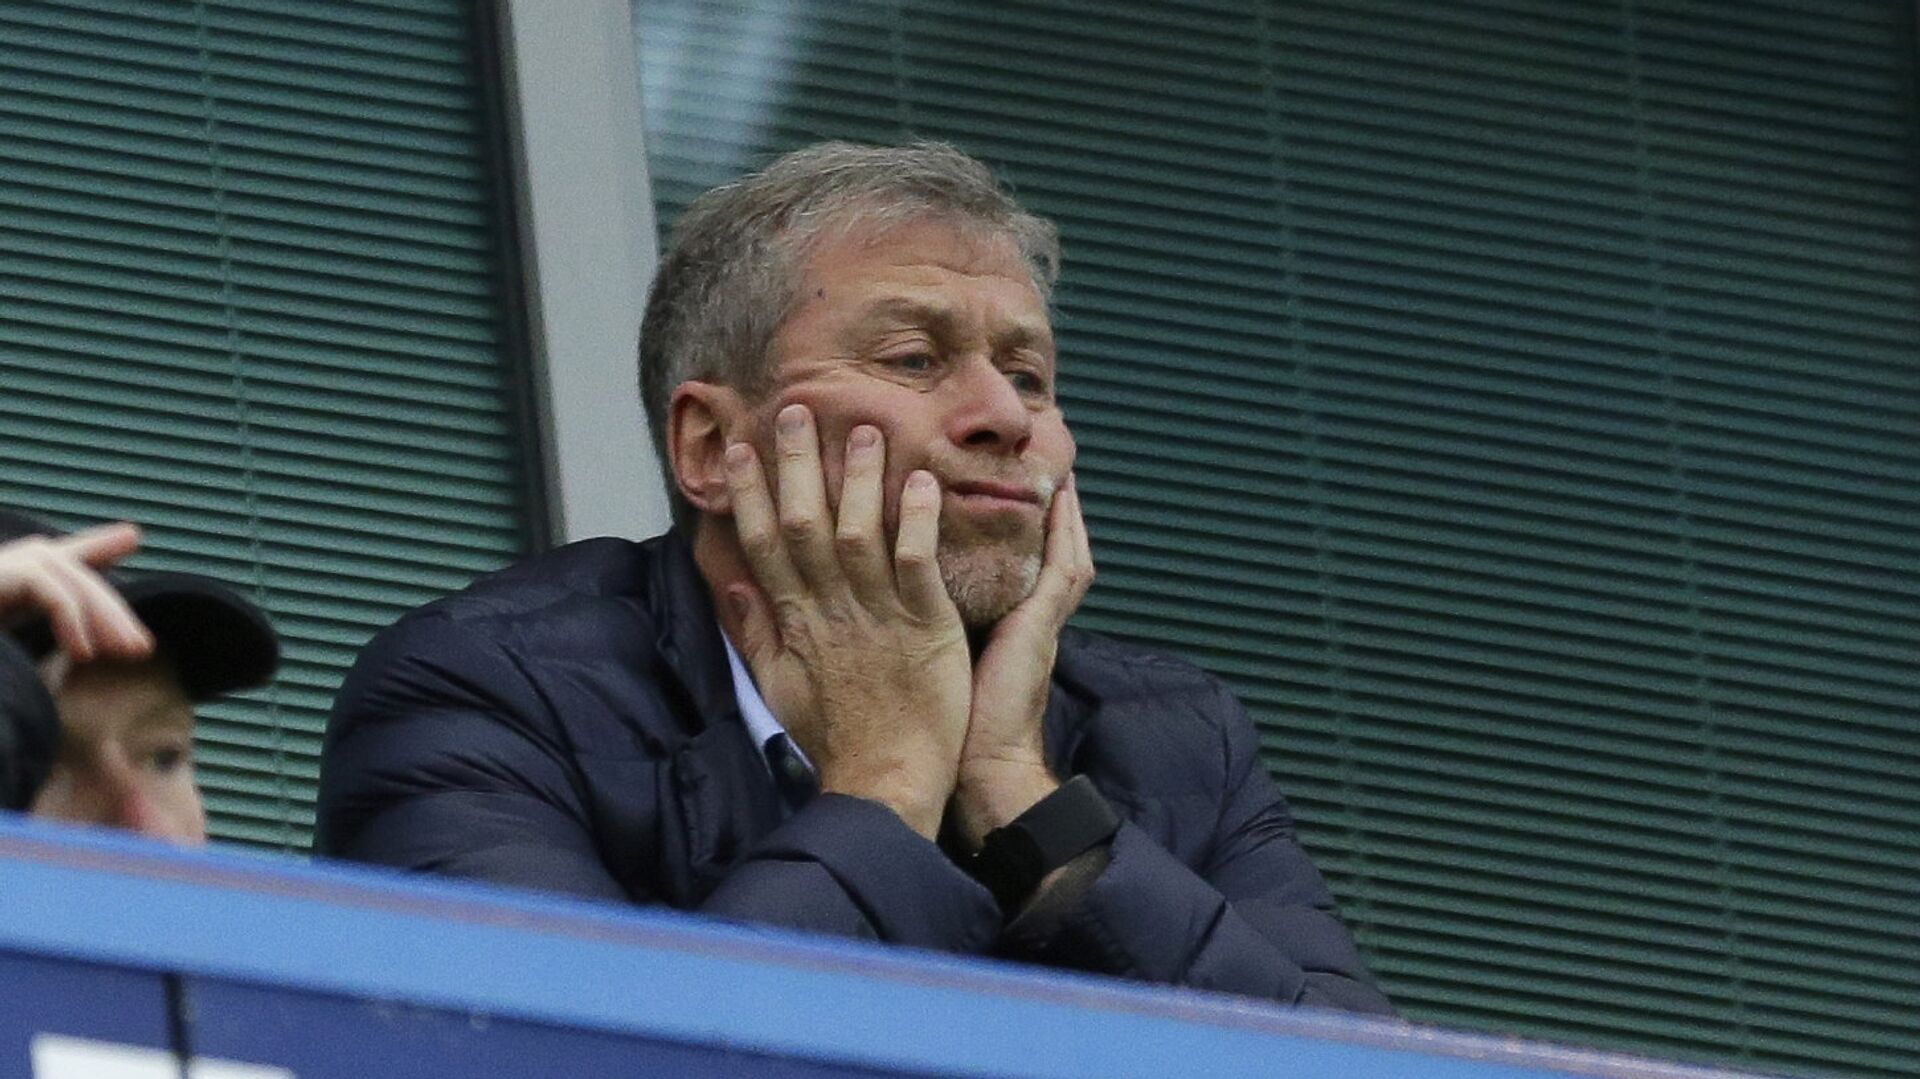 In this file photo dated Saturday, Dec. 19, 2015, Chelsea soccer club owner Roman Abramovich sits in his box before the English Premier League soccer match between Chelsea and Sunderland at Stamford Bridge stadium in London. Russian billionaire Roman Abramovich has received Israeli citizenship after his British visa has not been renewed. An Israeli Immigration and Absorption Ministry official says the Chelsea soccer club owner arrived in Israel Monday and was granted citizenship in accordance with an Israeli law granting that right to people of Jewish descent - Sputnik International, 1920, 12.03.2022